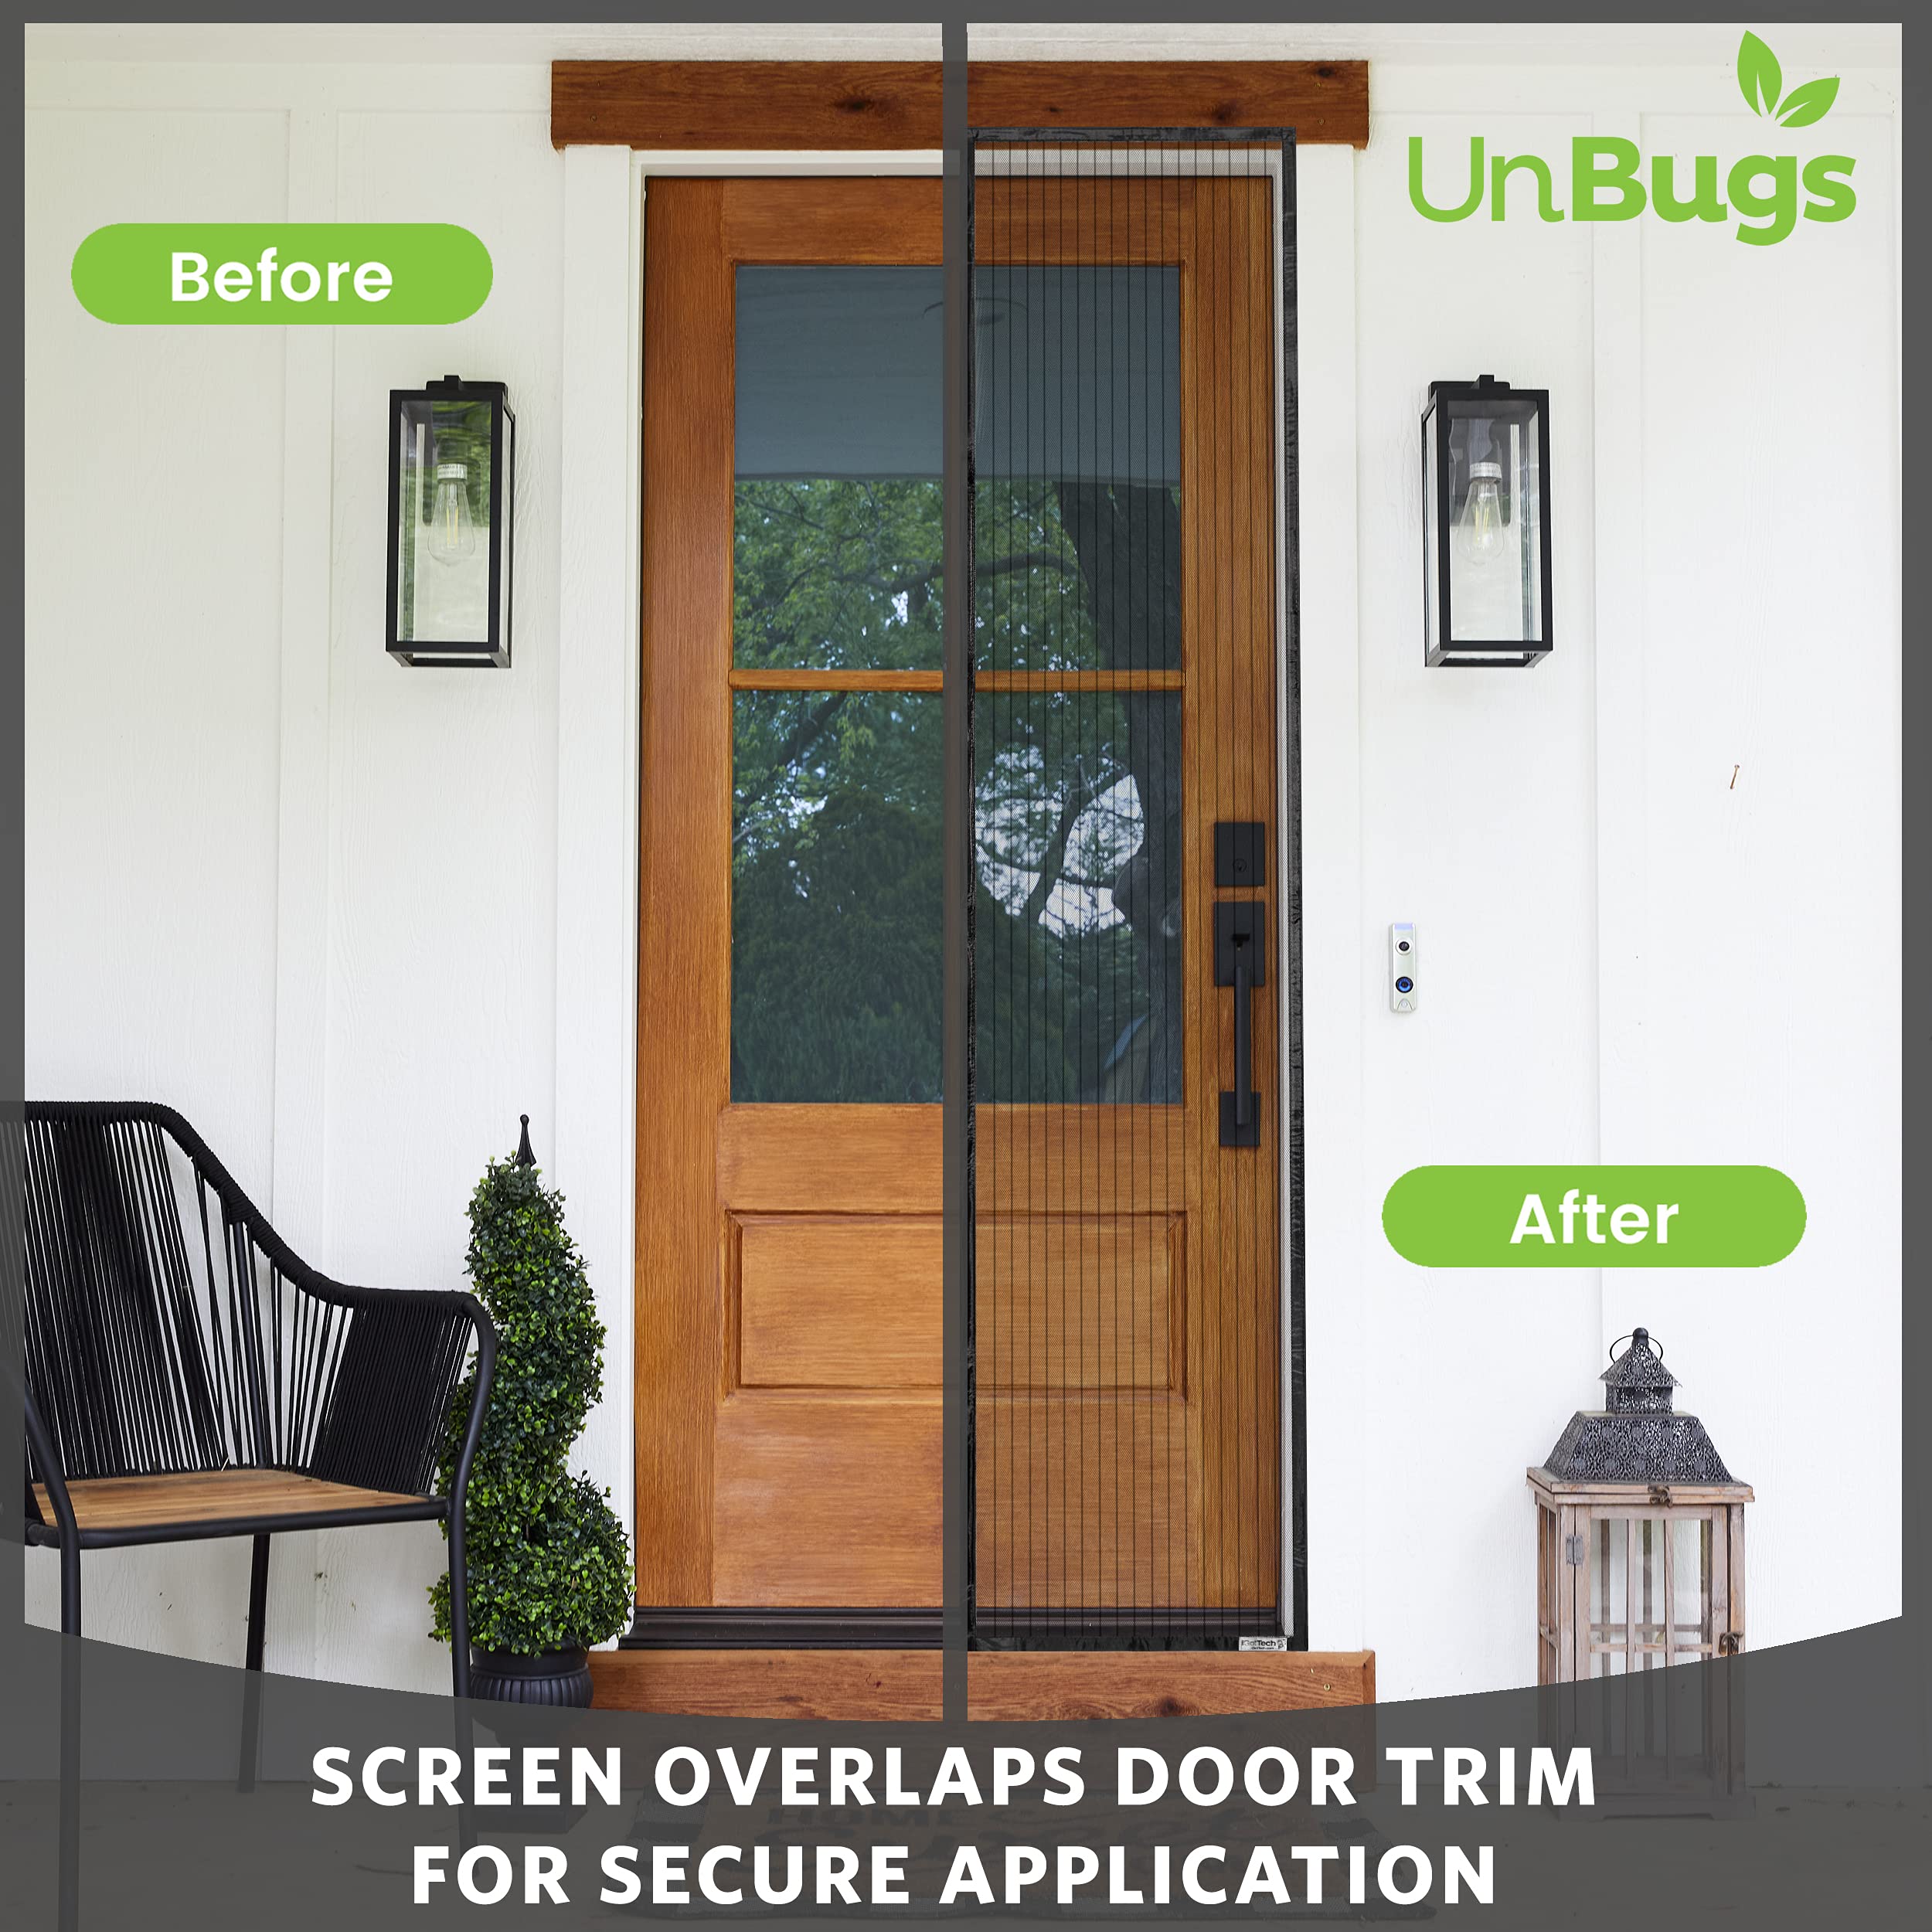 iGotTech Magnetic Screen Door, Full Frame Seal. Covers Doors up to 34 x 82 Inches MAX. (Item Size: 36 x 83)